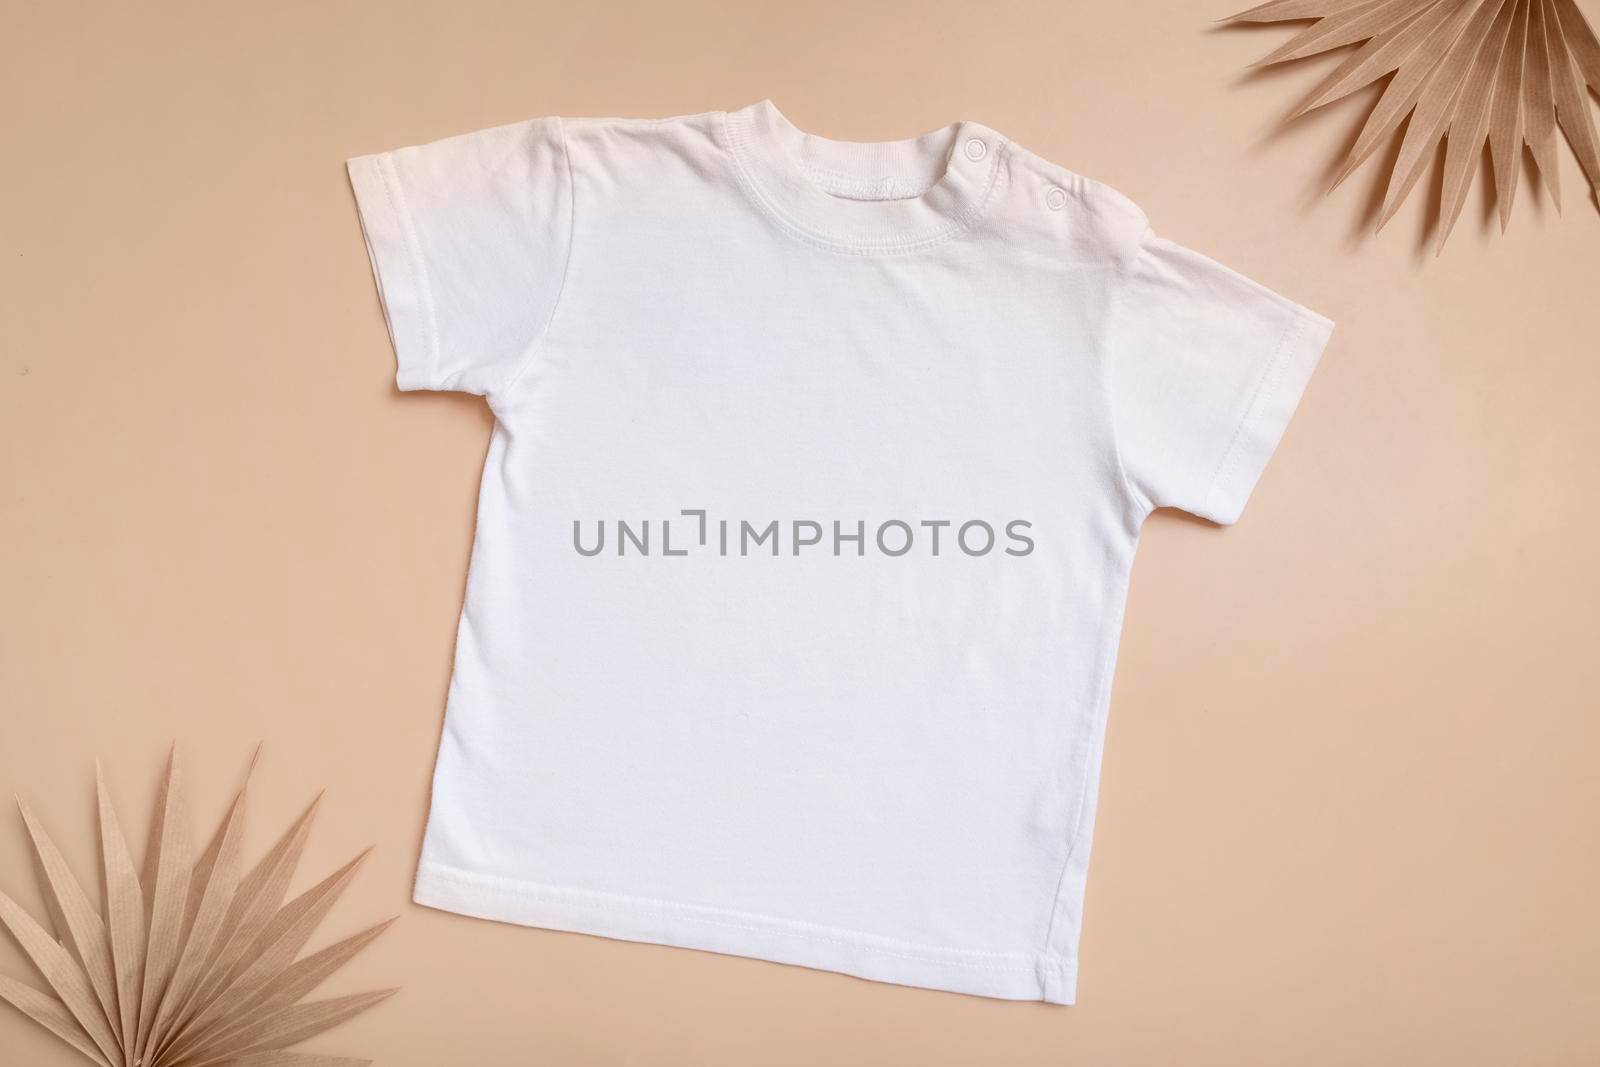 White baby t-shirt top view. Mock-up for logo, text or design on beige background. Flat lay child clothes with palm leaves.